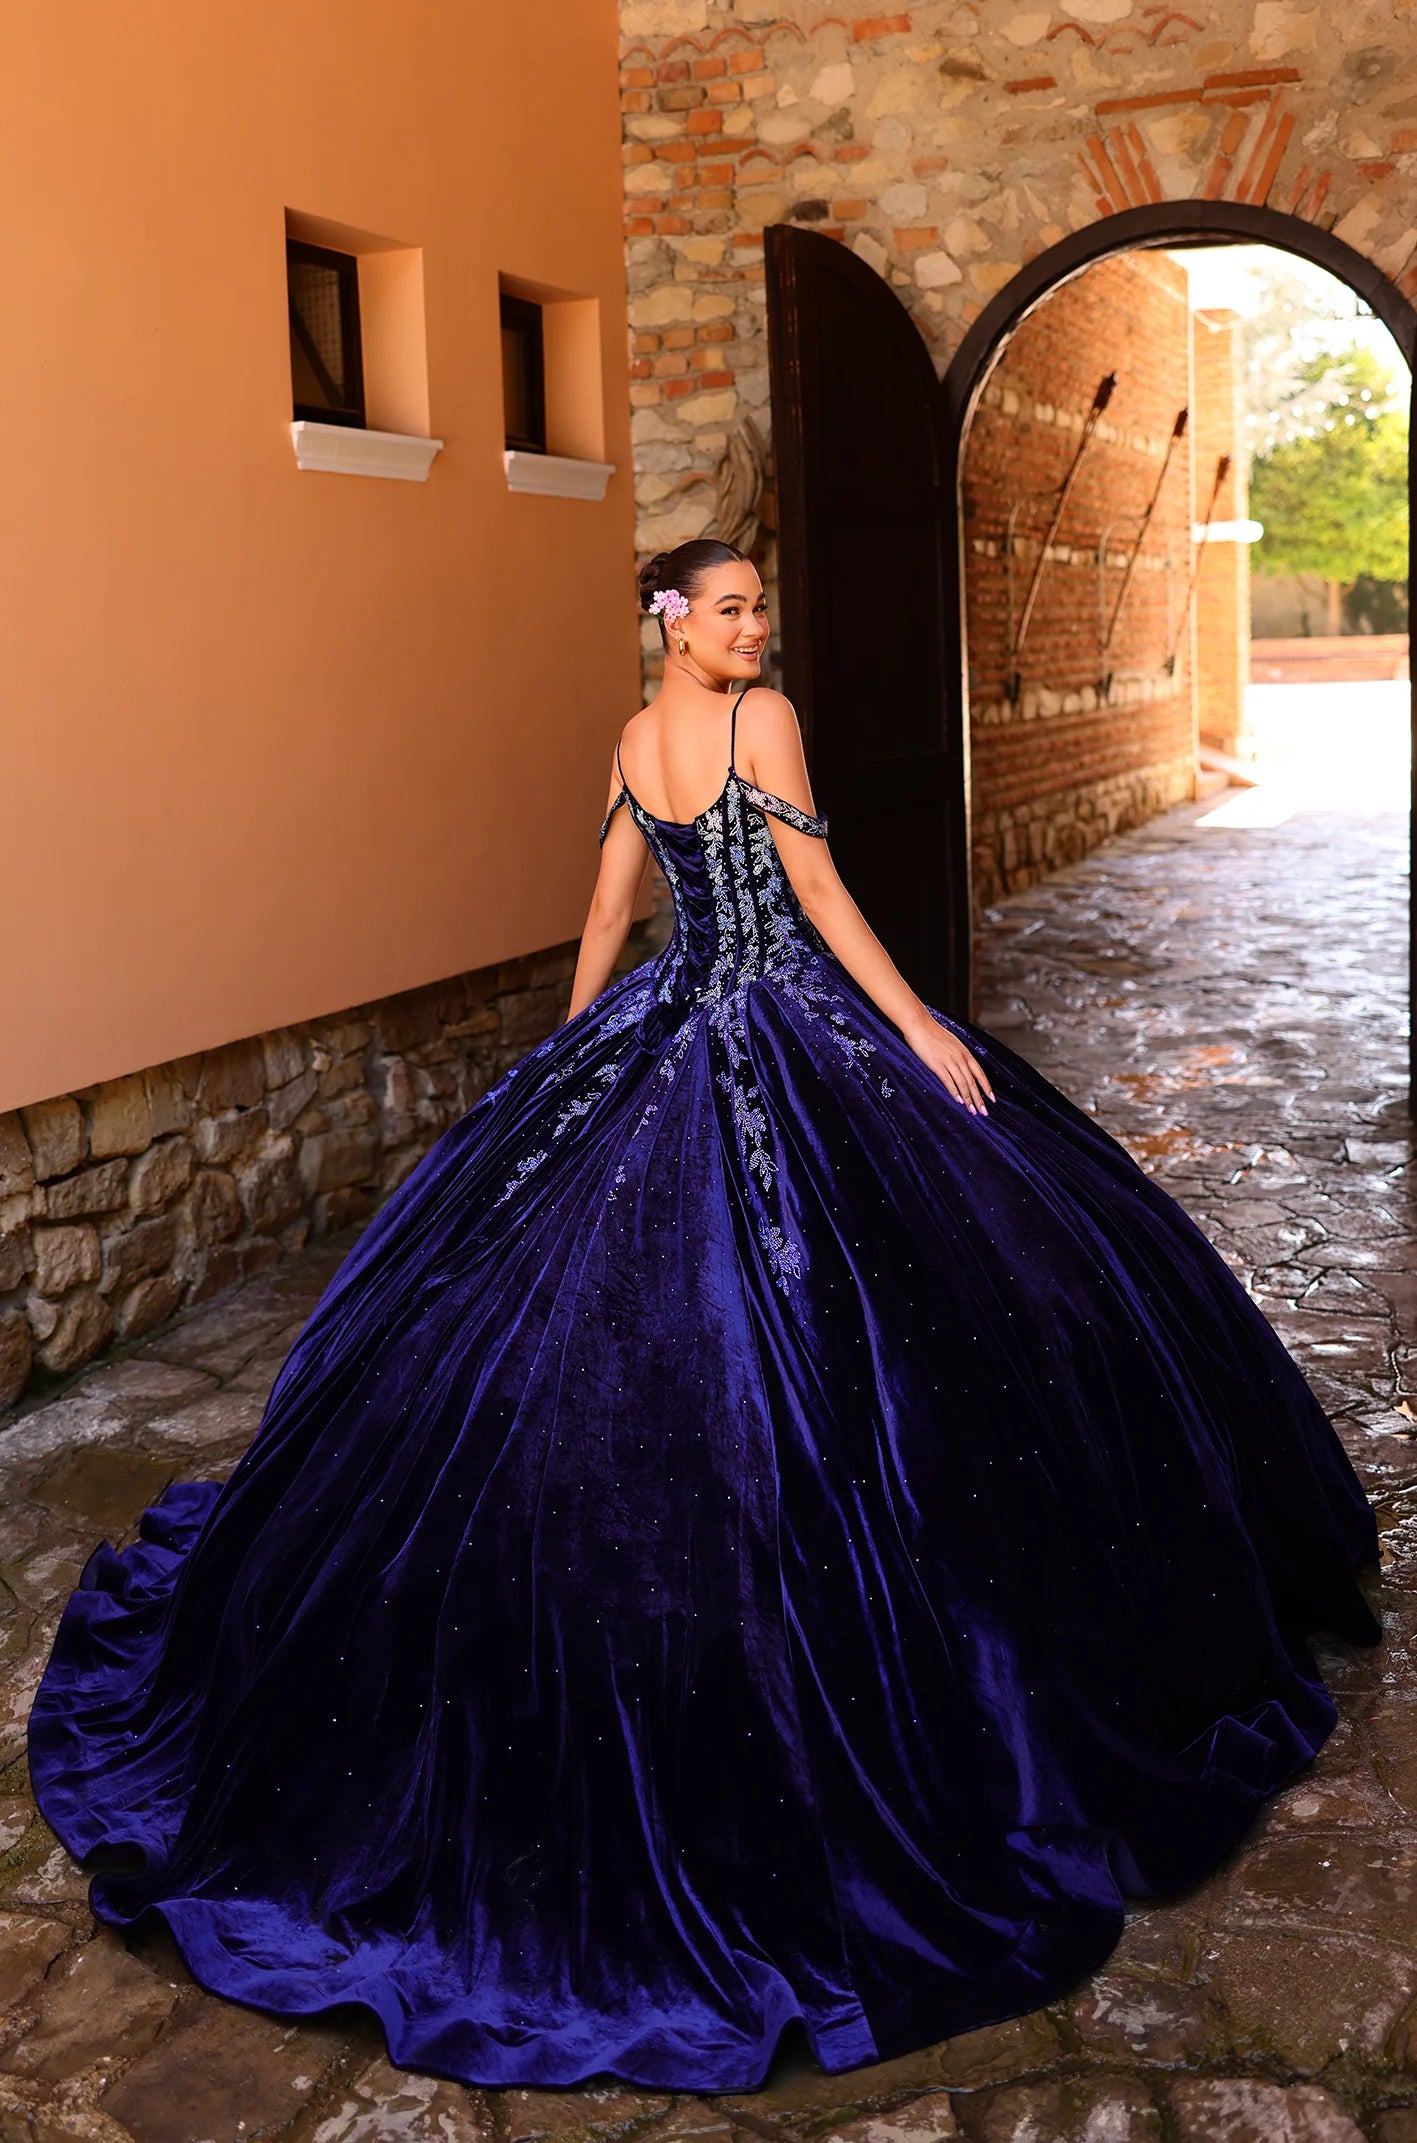 This elegant Amarra 54316 Velvet quinceanera dress is designed with a crystal corset, off-the-shoulder neckline, and princess ball gown silhouette. Made with soft velvet fabric, this dress will make any quinceanera celebration unforgettable. Perfect for a formal party or special occasion, this dress exudes sophistication and grace.